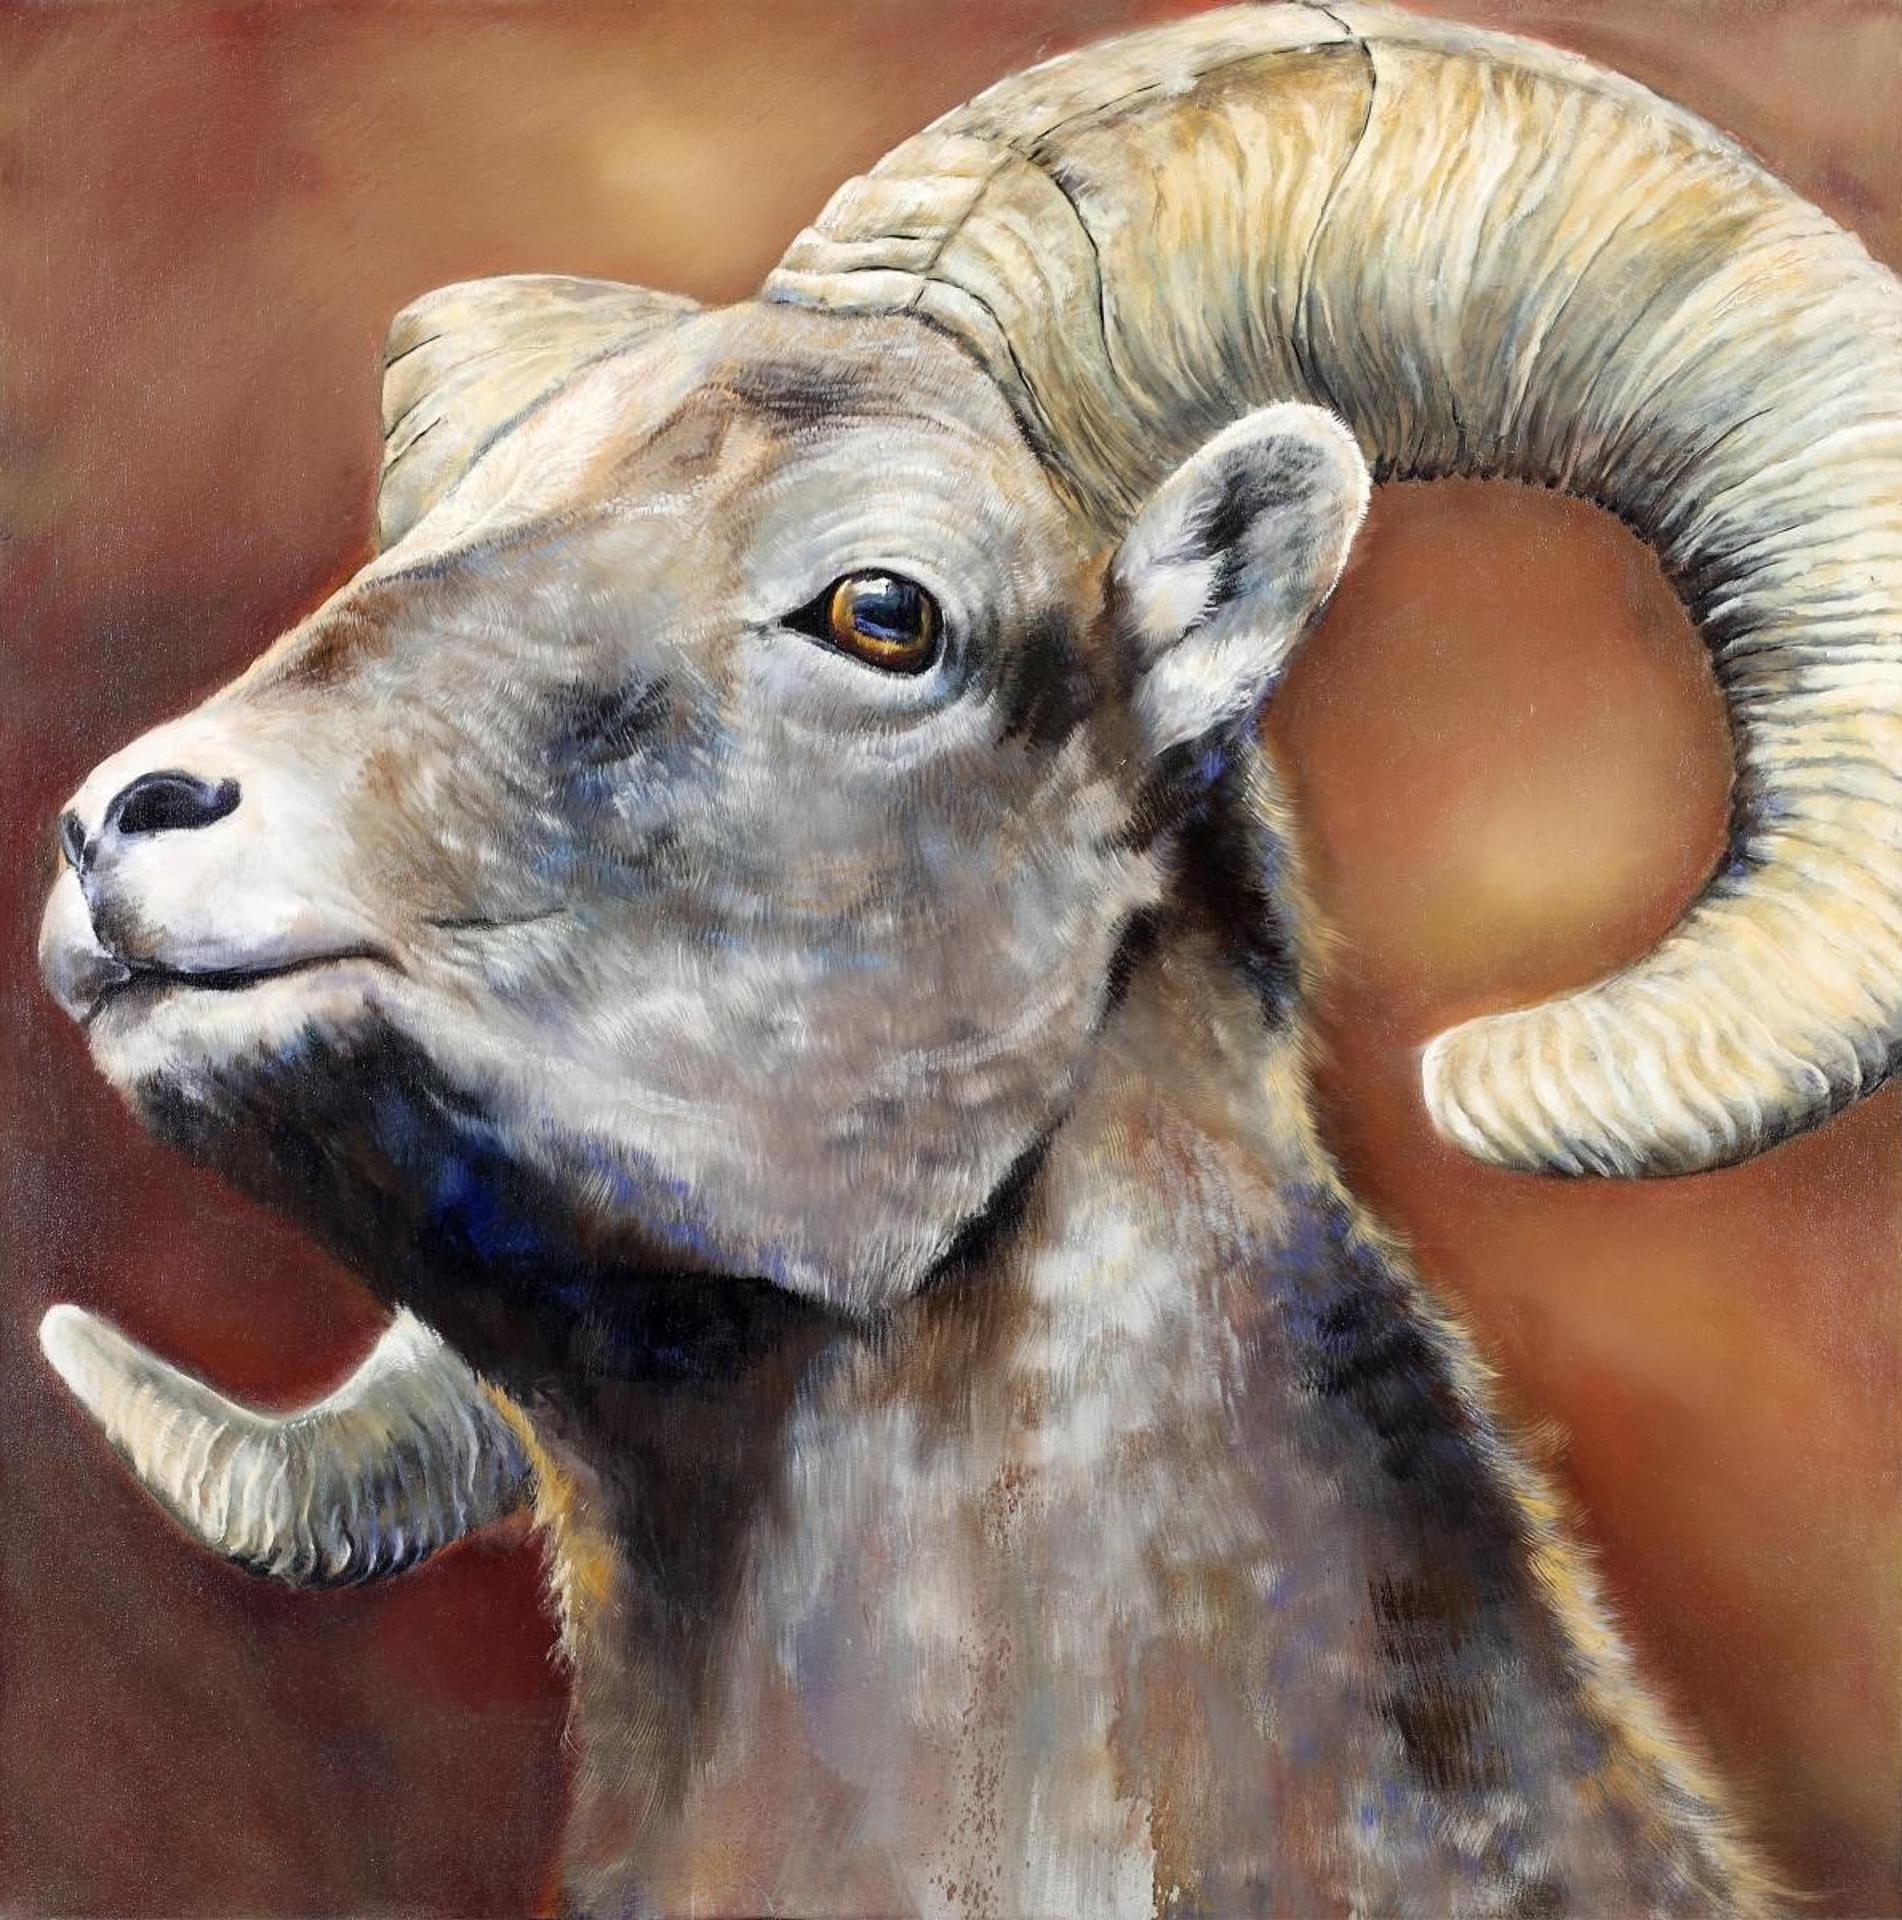 Richard Cole (1968) - Great Horned Sheep; 2015